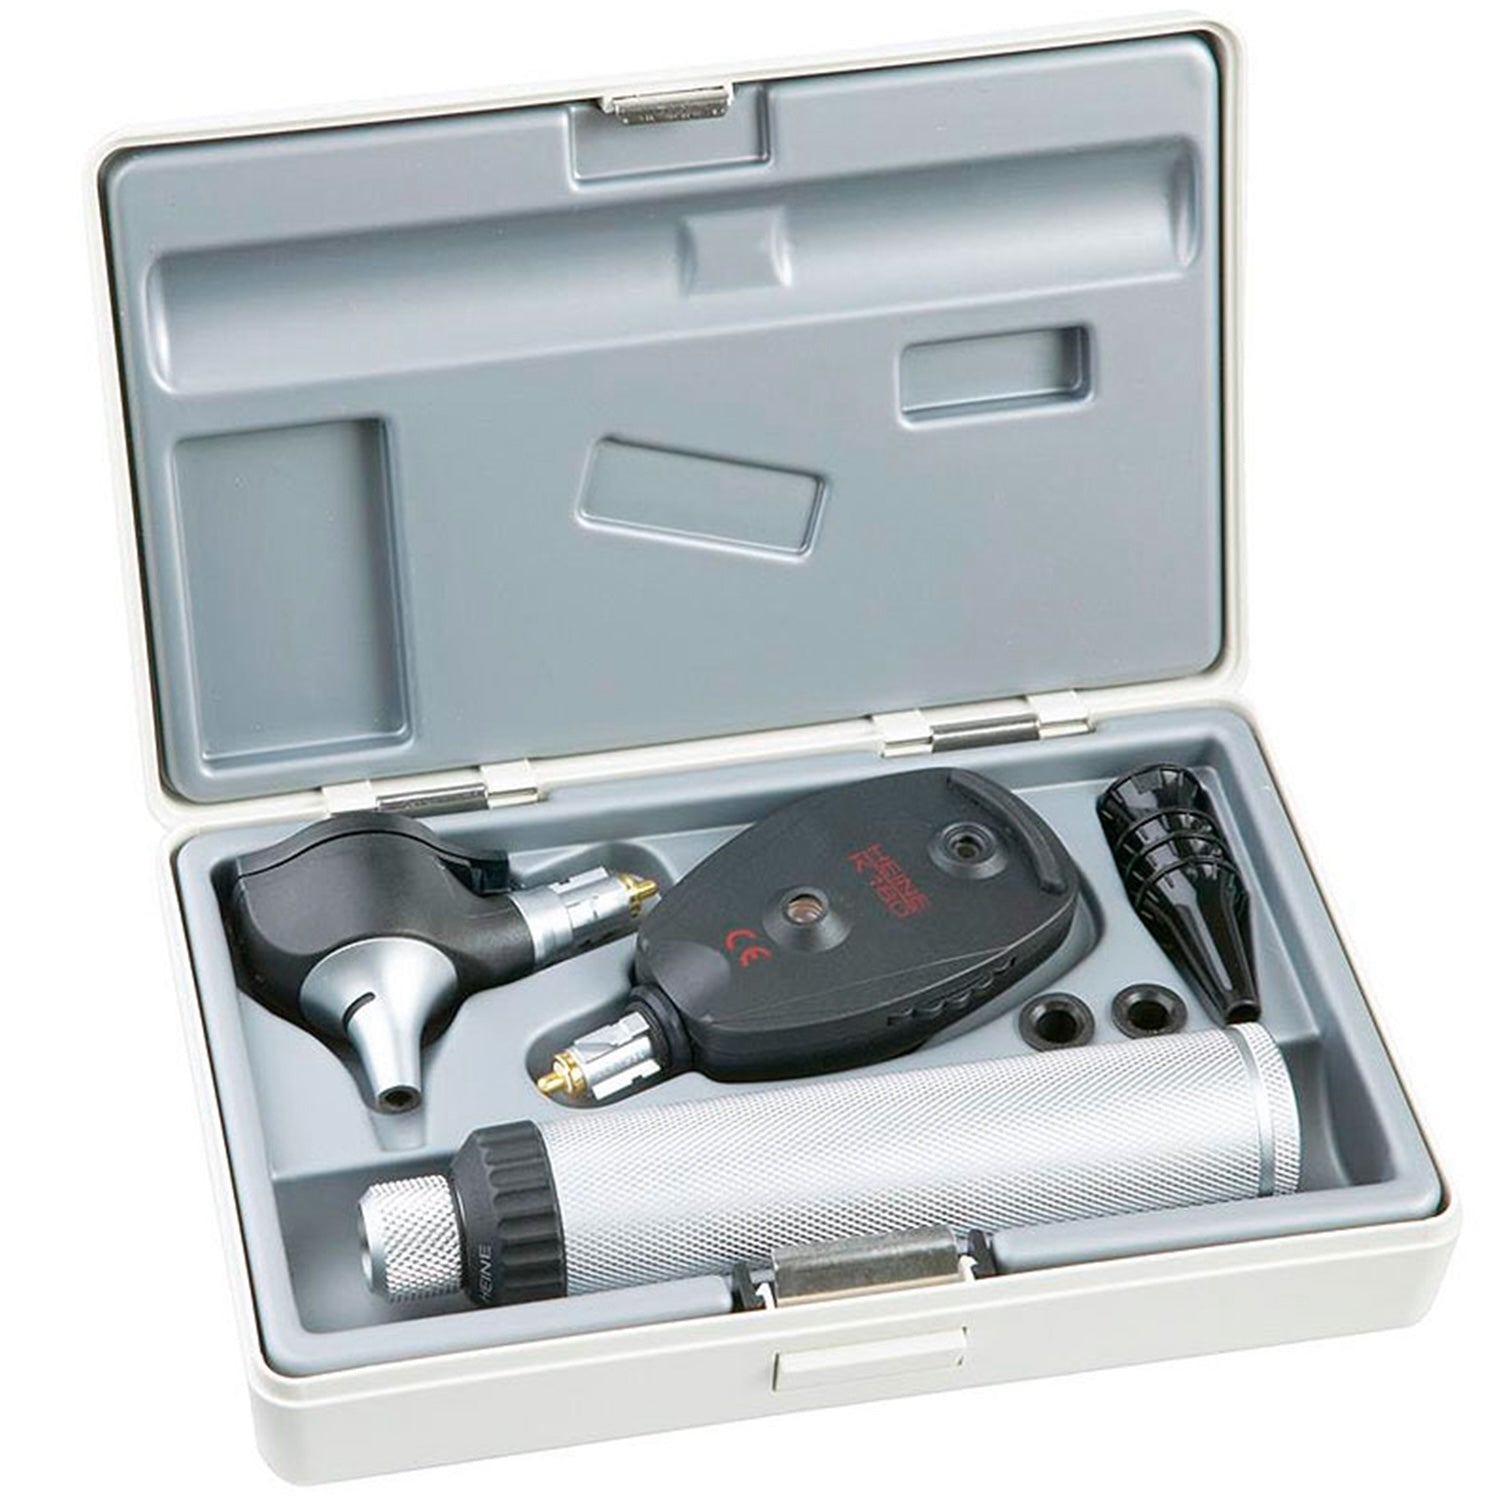 HEINE K180 Fibre Optic Diagnostic Set with BETA 4 USB Rechargeable Handle with USB Cord & Power Supply